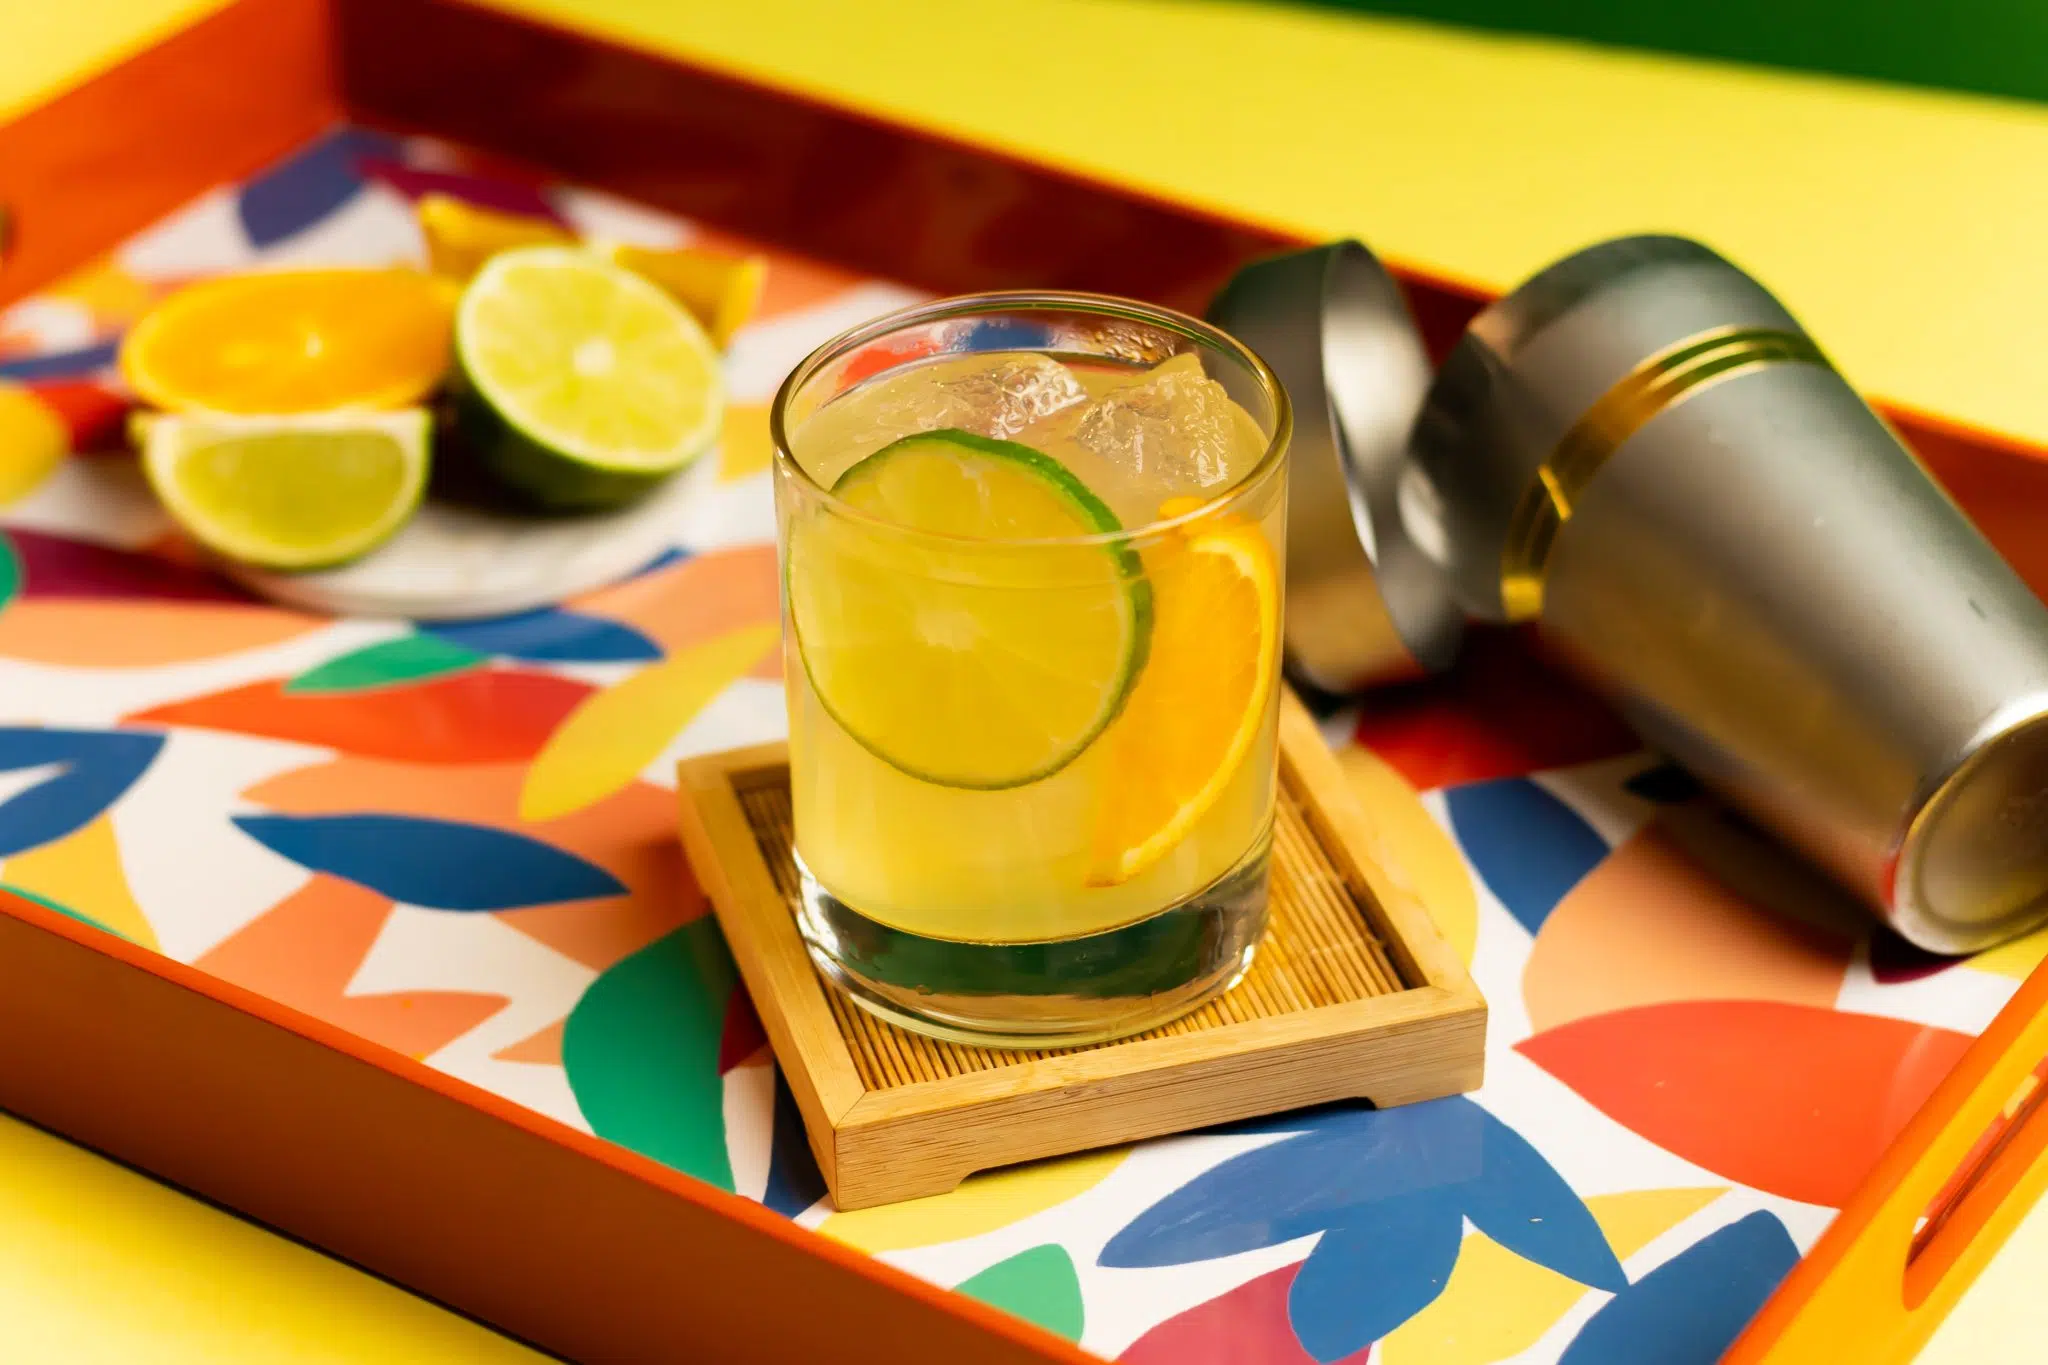 A side shot of a Brazil 66 cocktail in an old fashioned glass on a wooden coaster placed on a multicolor tray surrounded by a shaker, two lime pieces and an orange slice